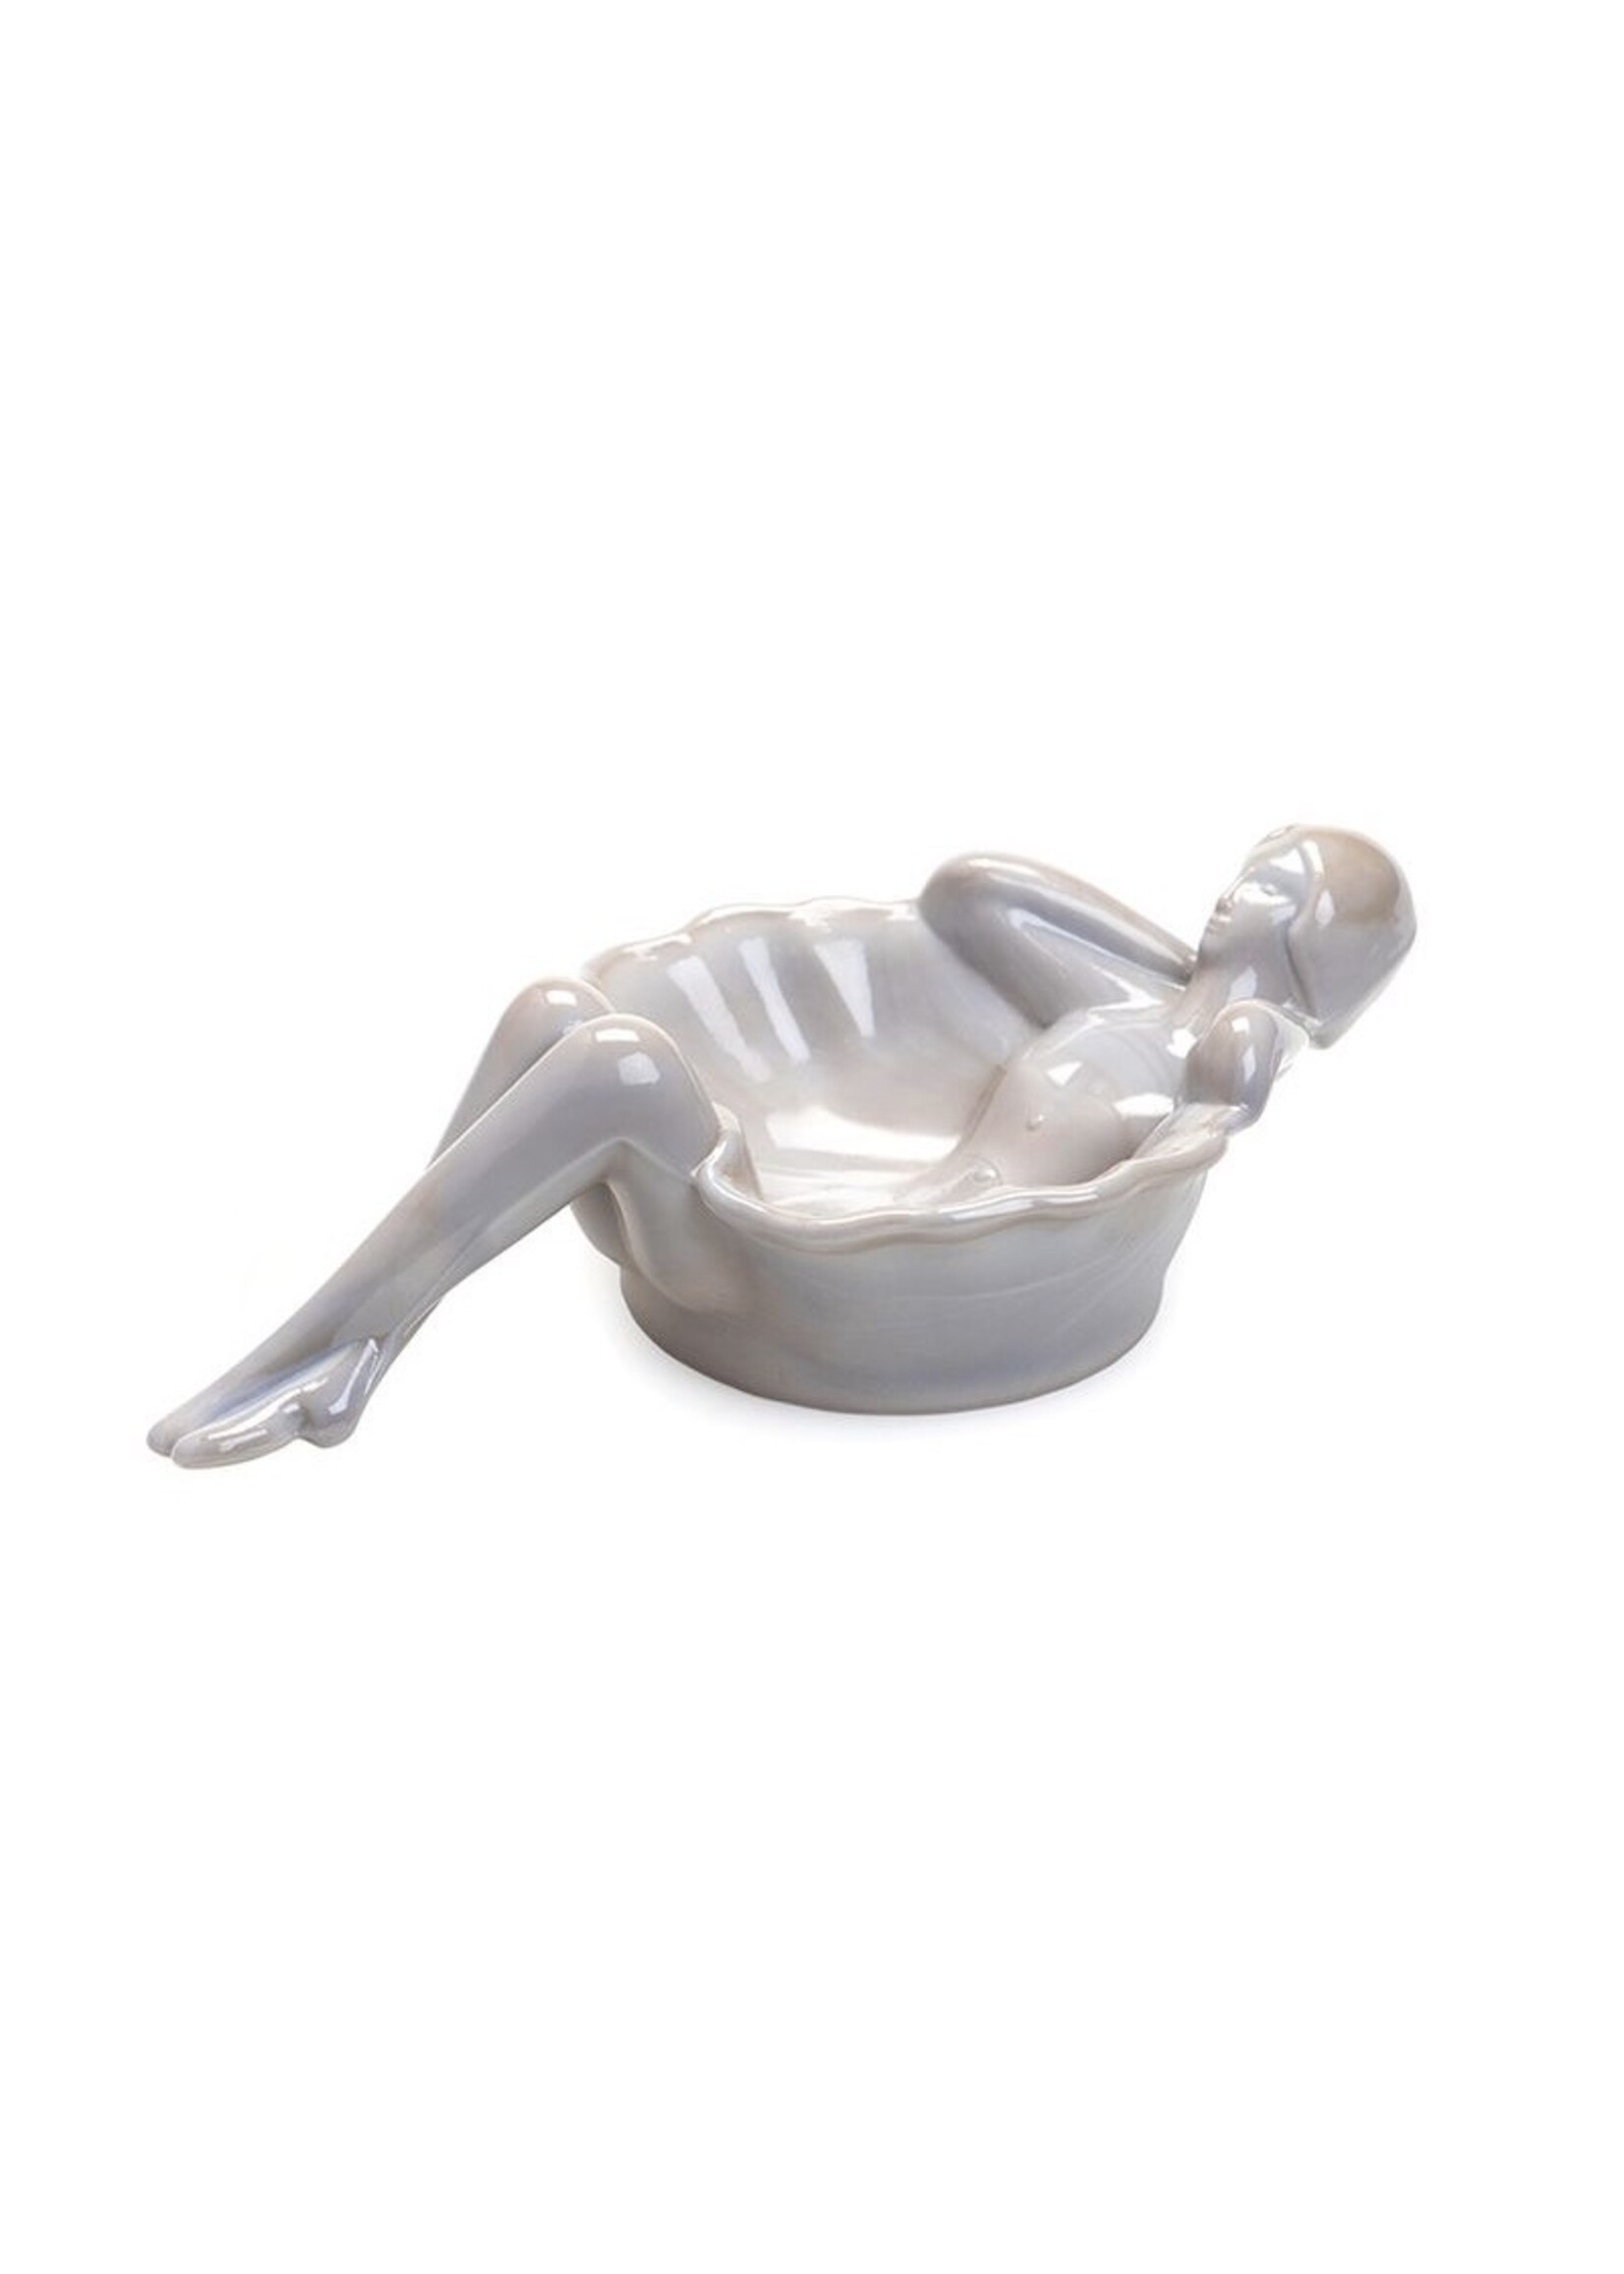 Mosser Glass Soap dishes "Bathing Beauty" by Mosser Glass